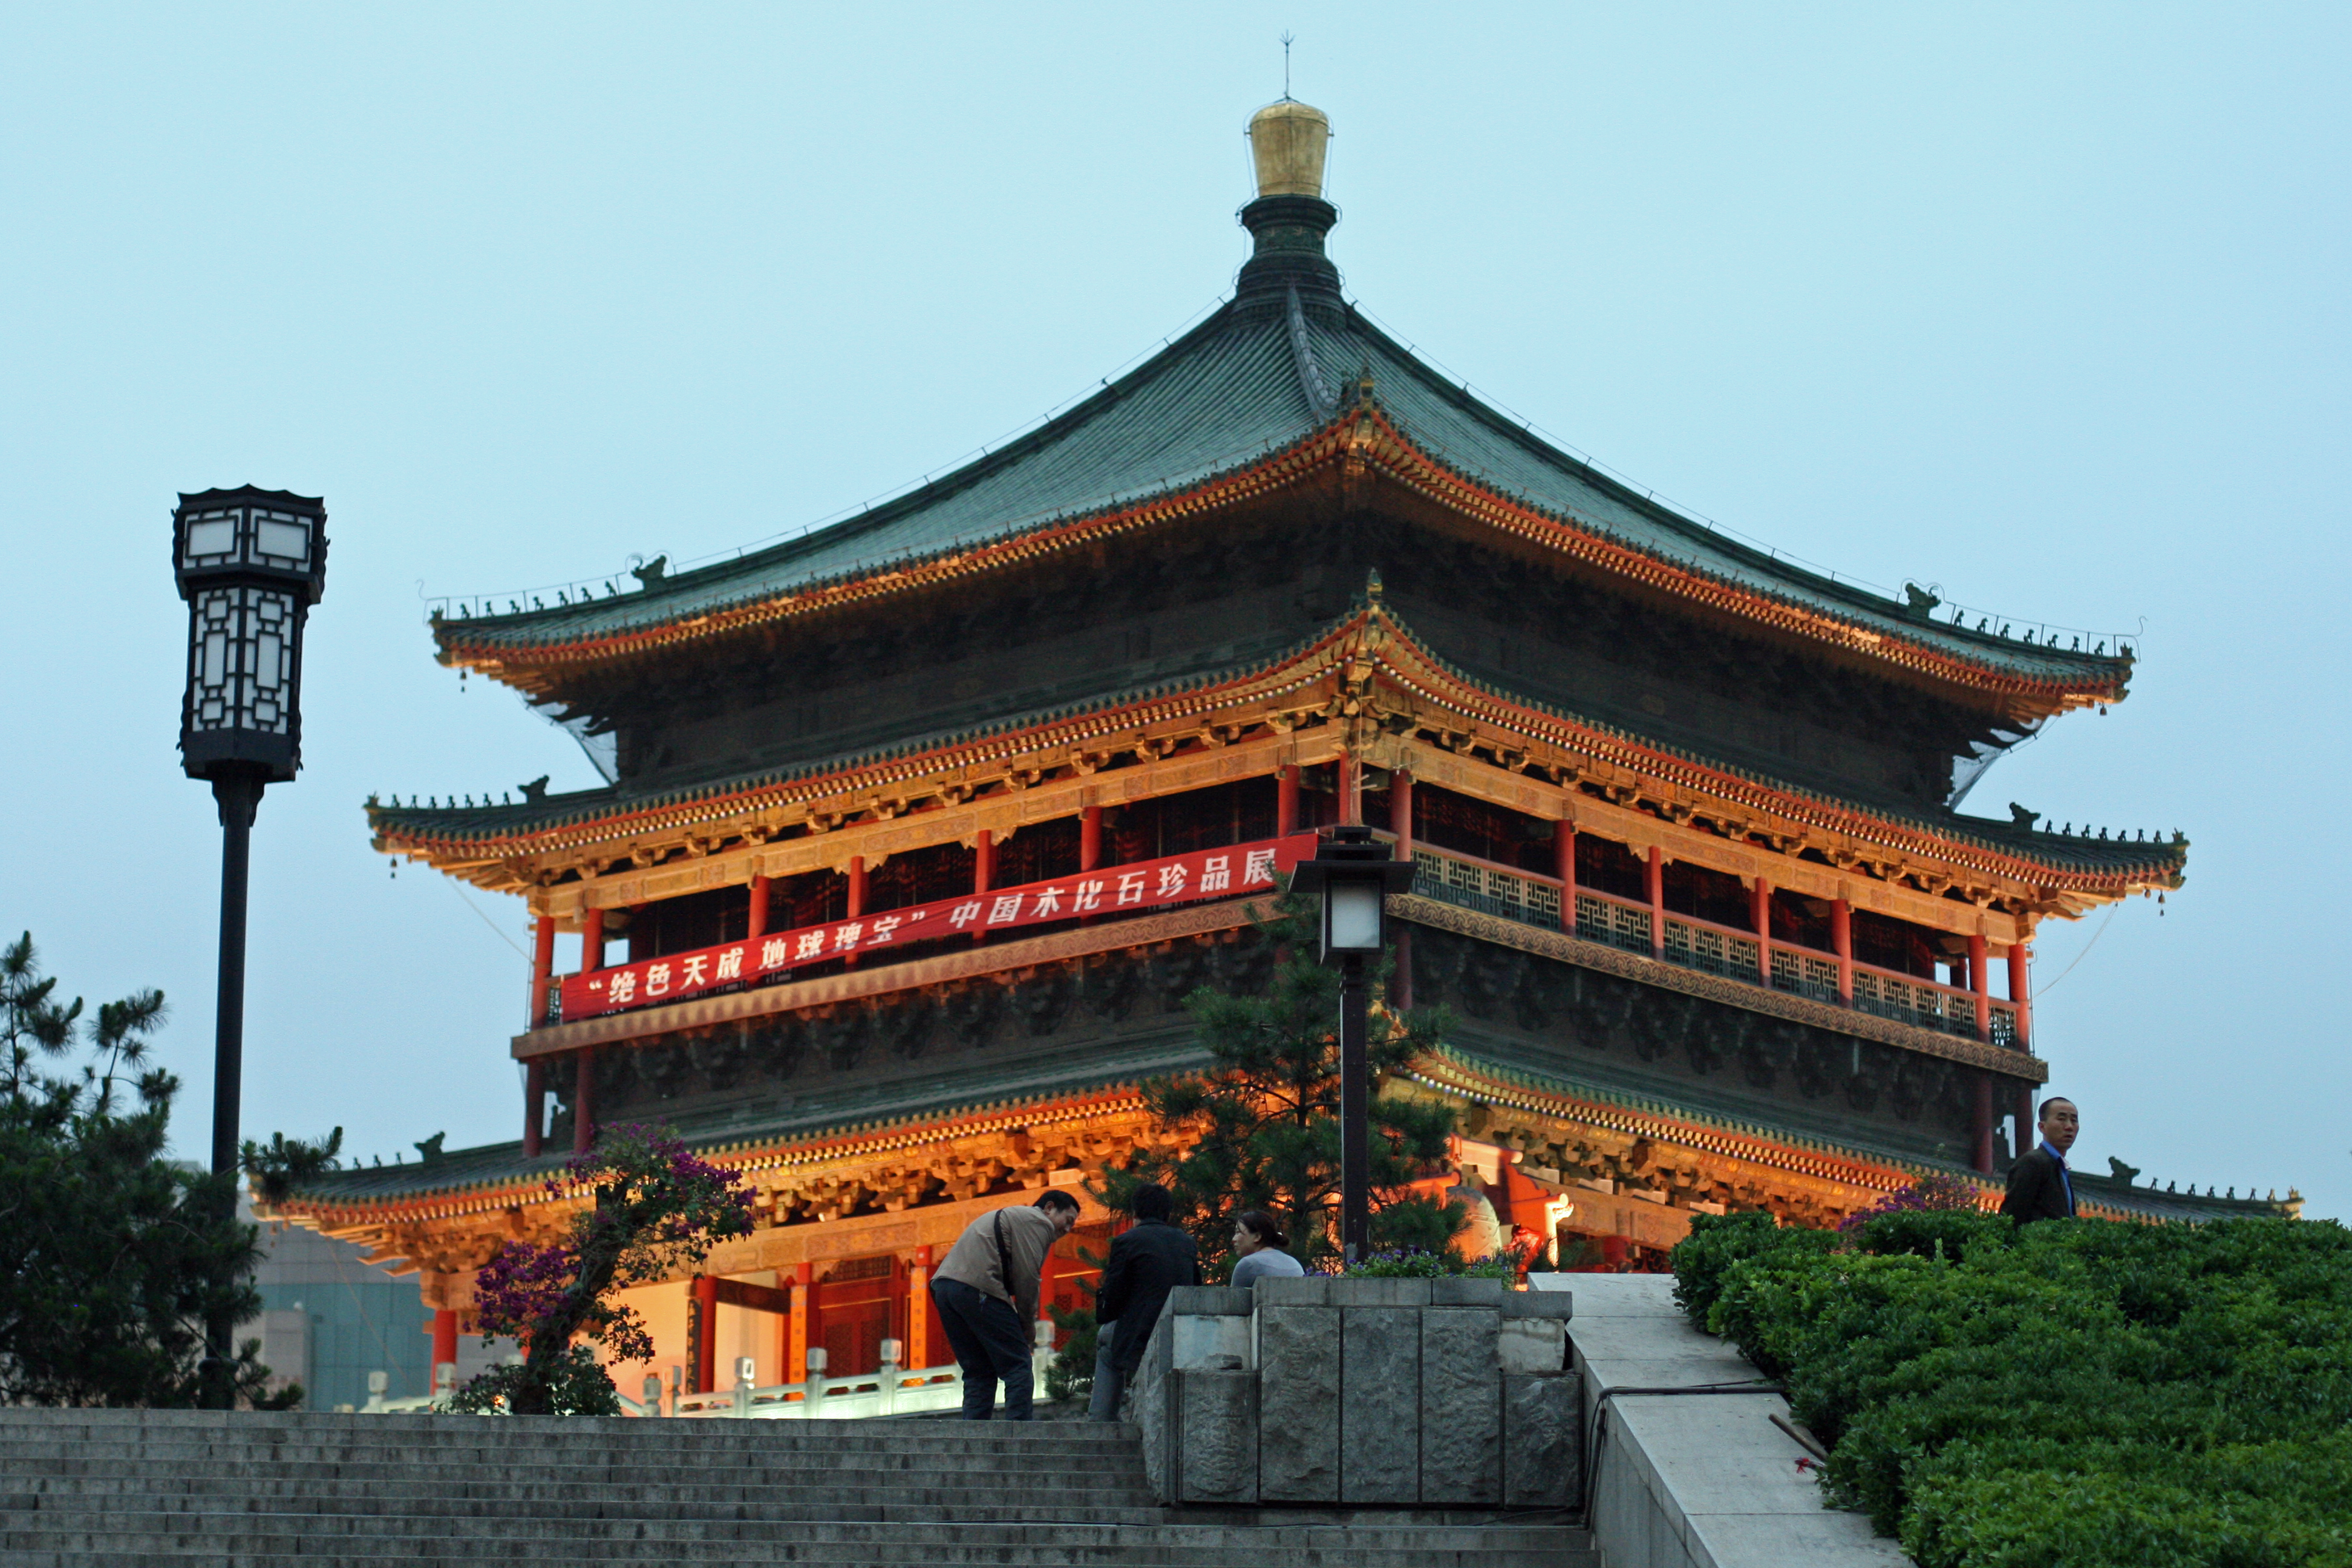 Bell Tower Of Xi'an Backgrounds, Compatible - PC, Mobile, Gadgets| 3888x2592 px